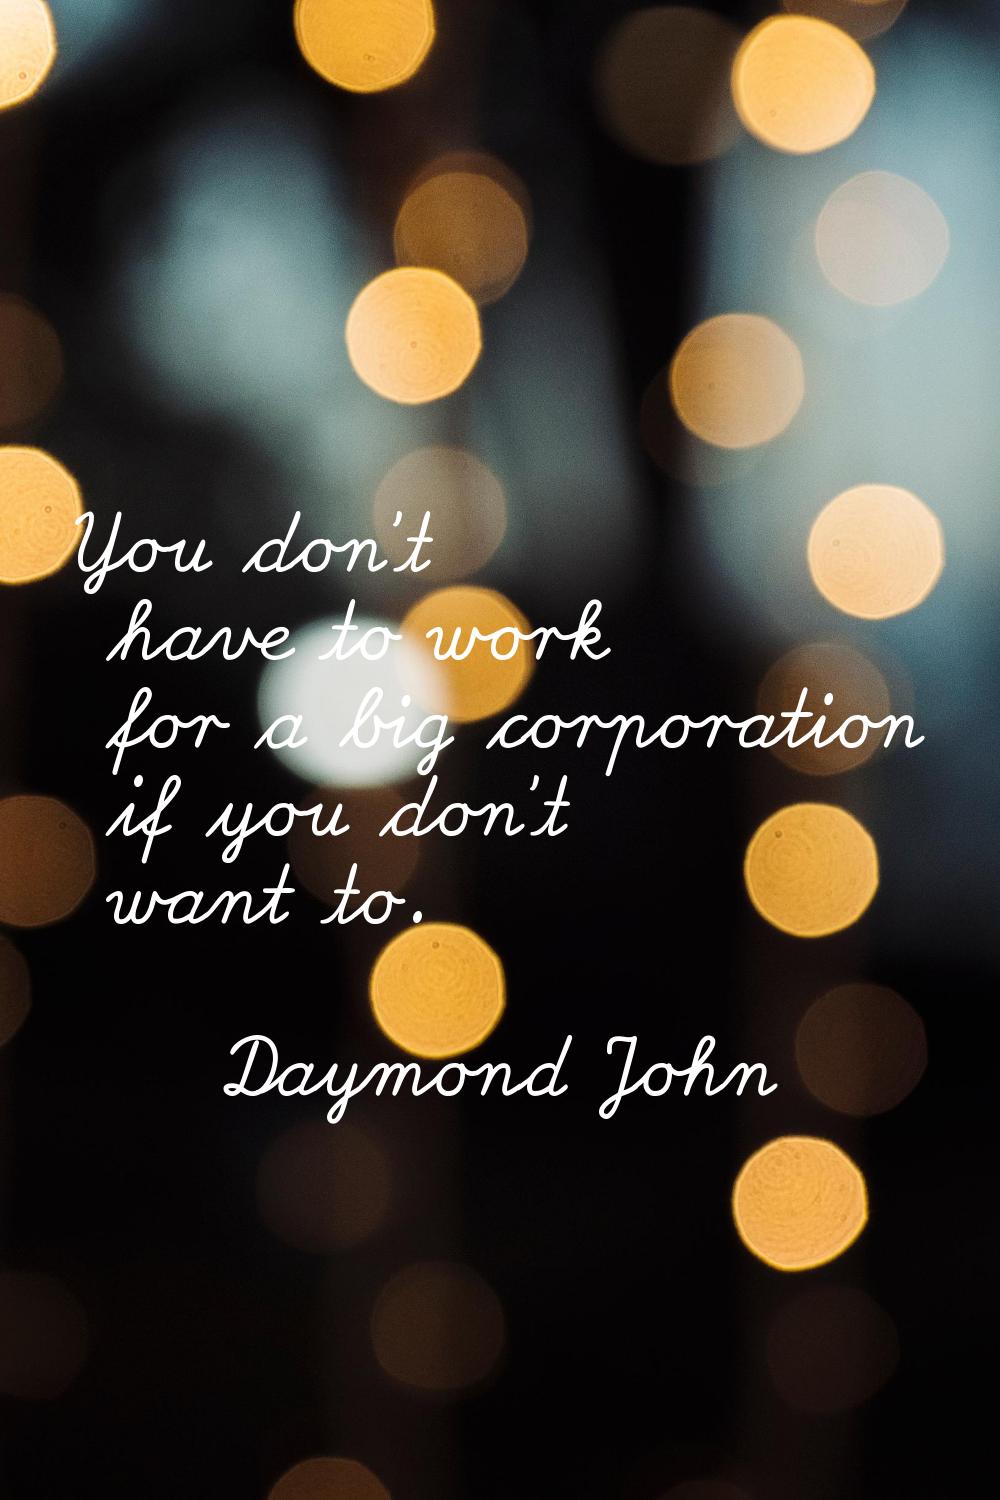 You don't have to work for a big corporation if you don't want to.